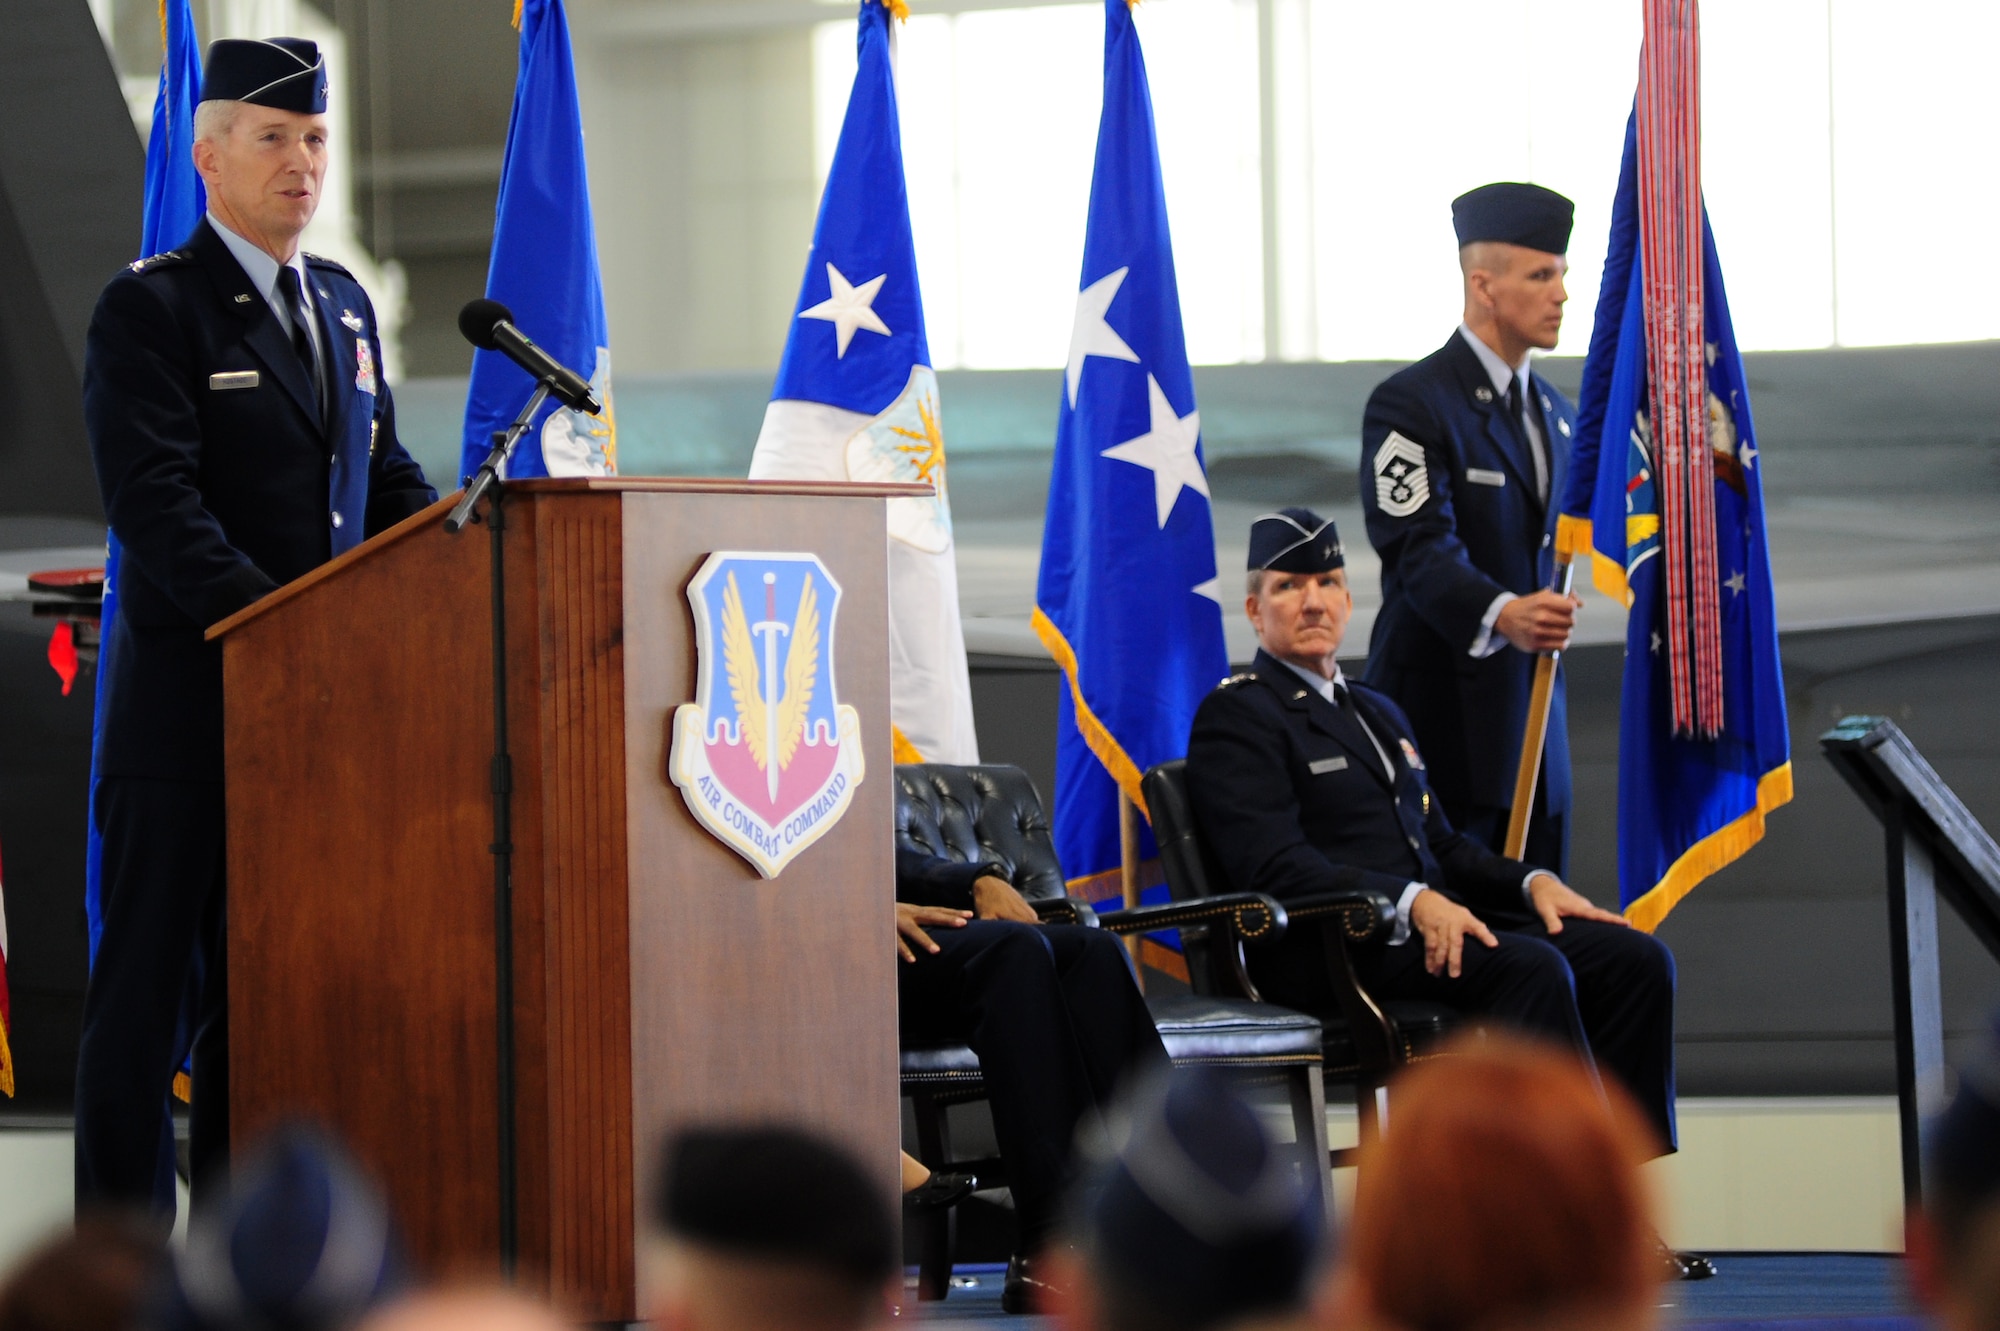 U.S. Air Force Gen. Mike Hostage, former commander of Air Combat Command, addresses the crowd during the ACC change of command ceremony at Langley Air Force Base, Va., Nov. 4, 2014. Hostage relinquished command of ACC to Gen. Hawk Carlisle and retires from the Air Force after 37 years of service.  (U.S. Air Force photo by Airman 1st Class Areca T. Wilson/Released) 